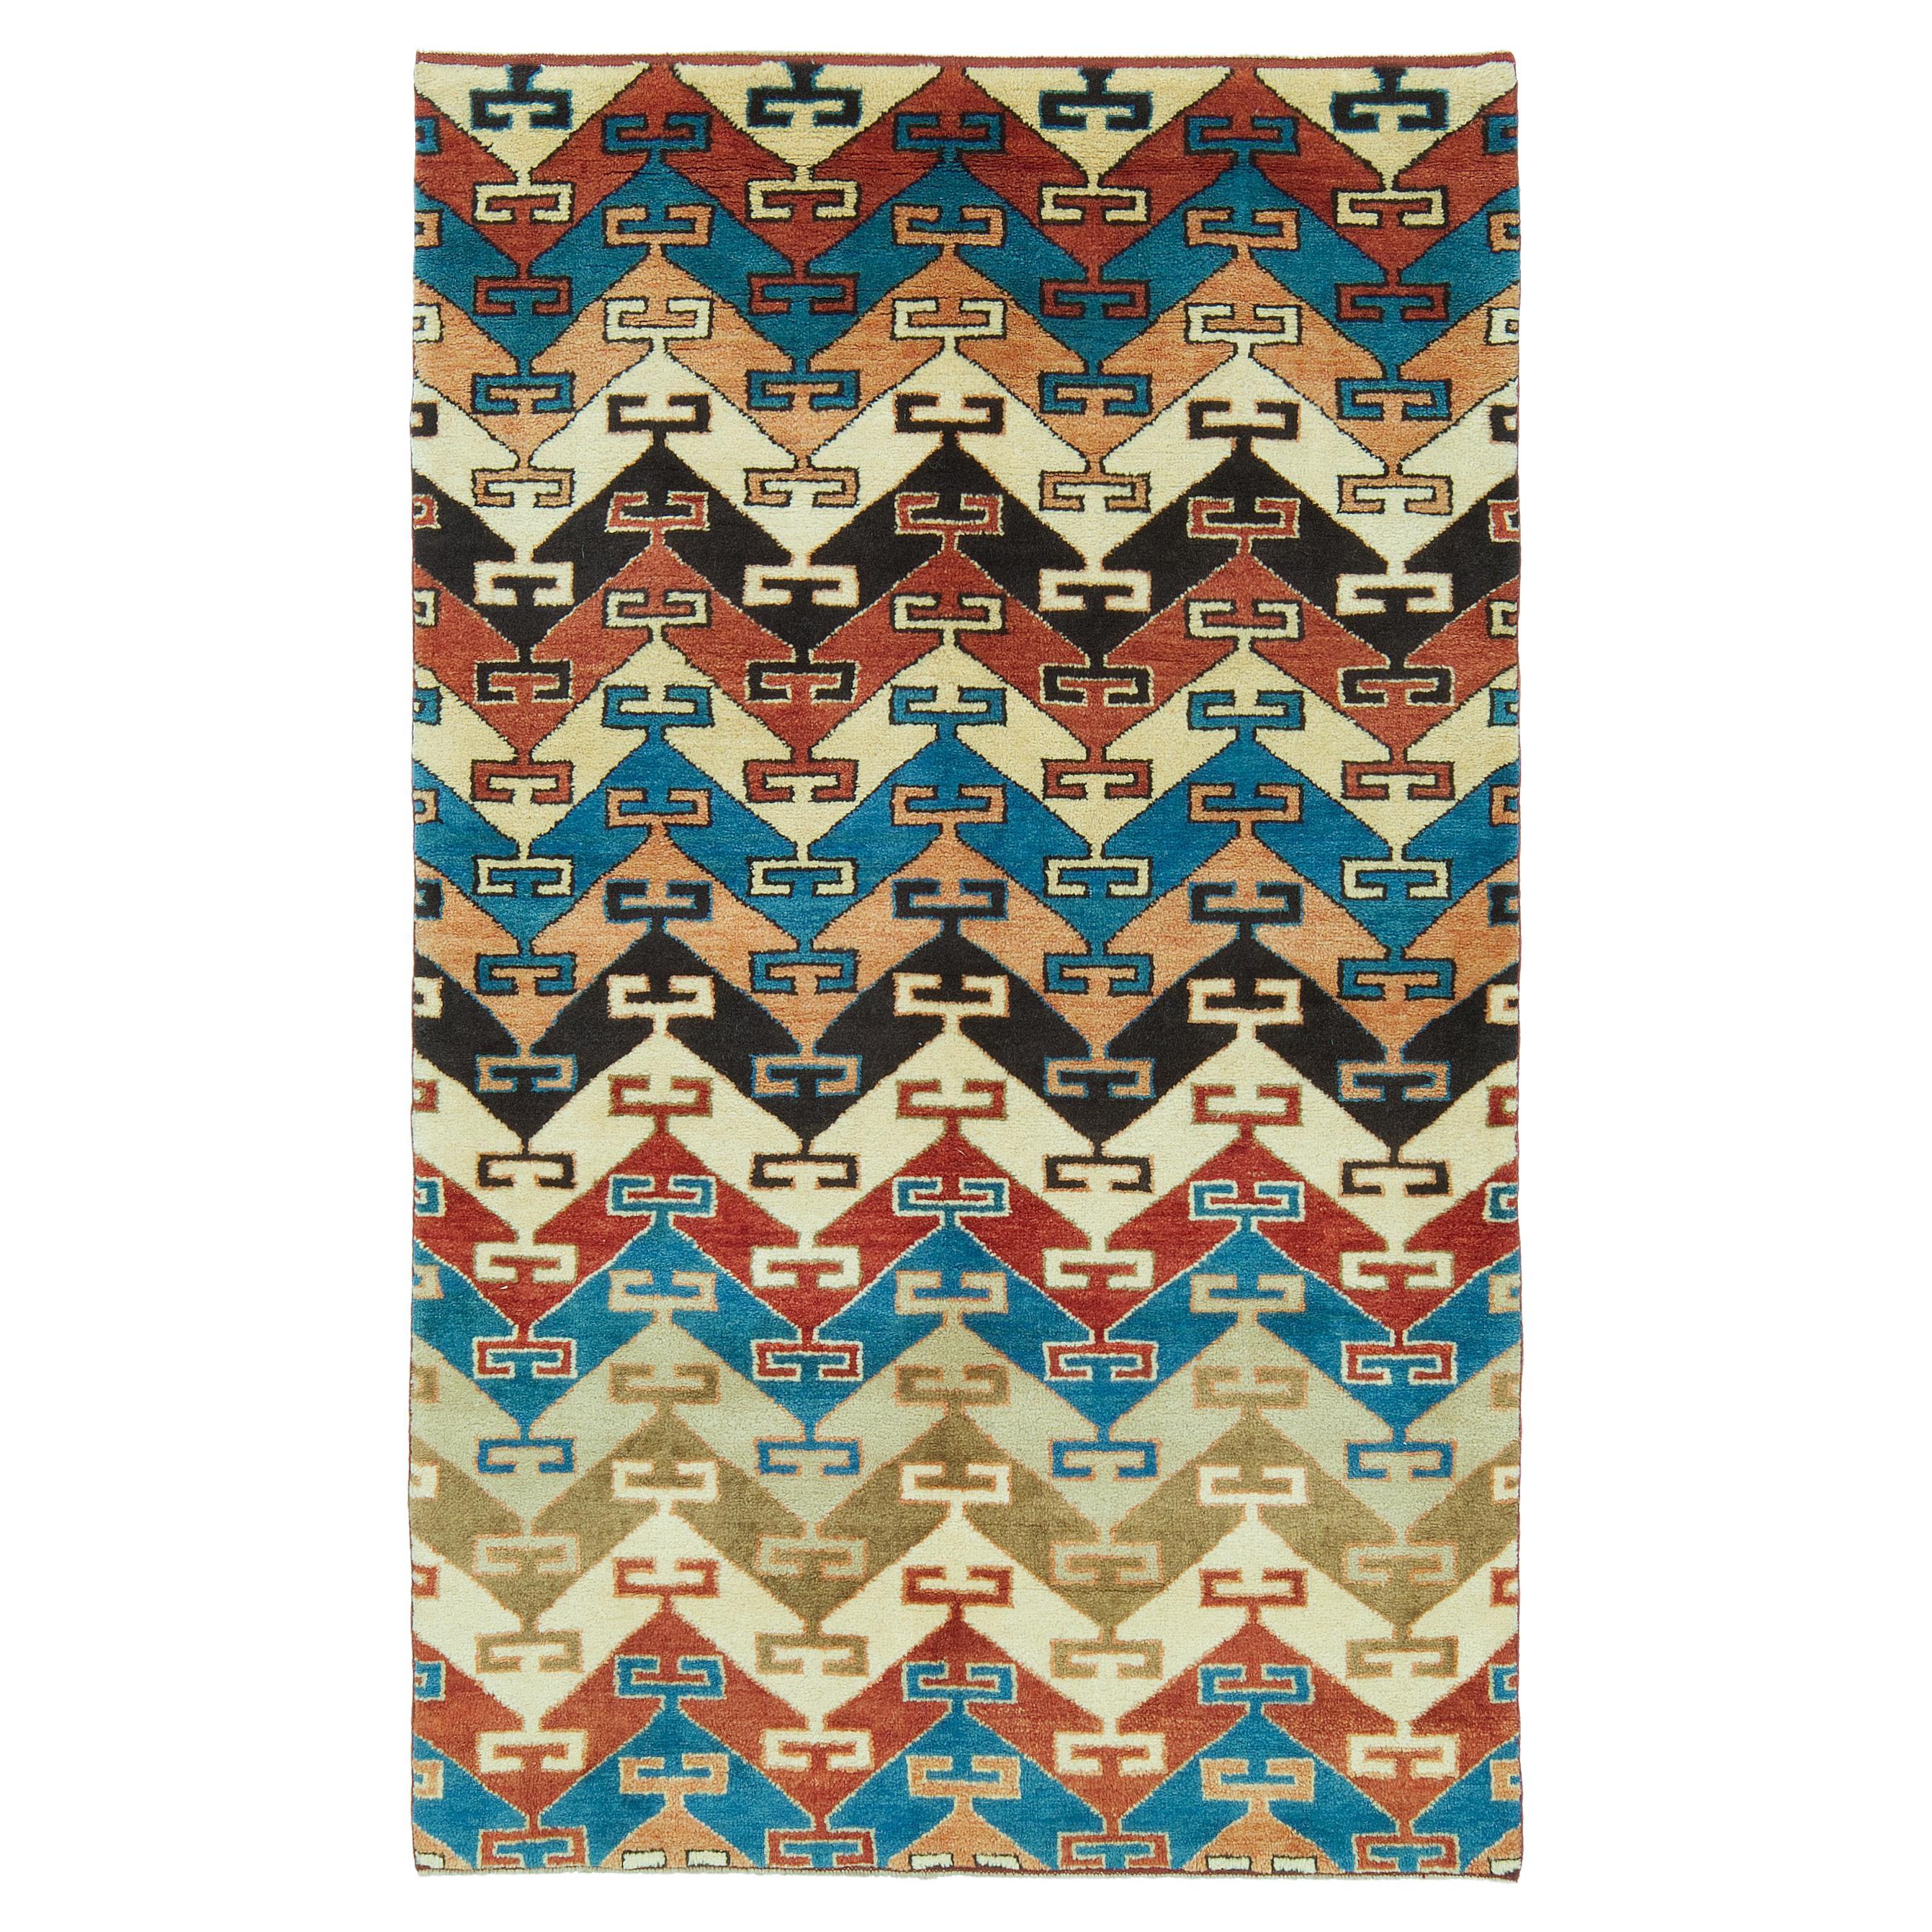 Ararat Rugs Zig-Zag Lines Rug, Antique Anatolian Revival Carpet, Natural Dyed